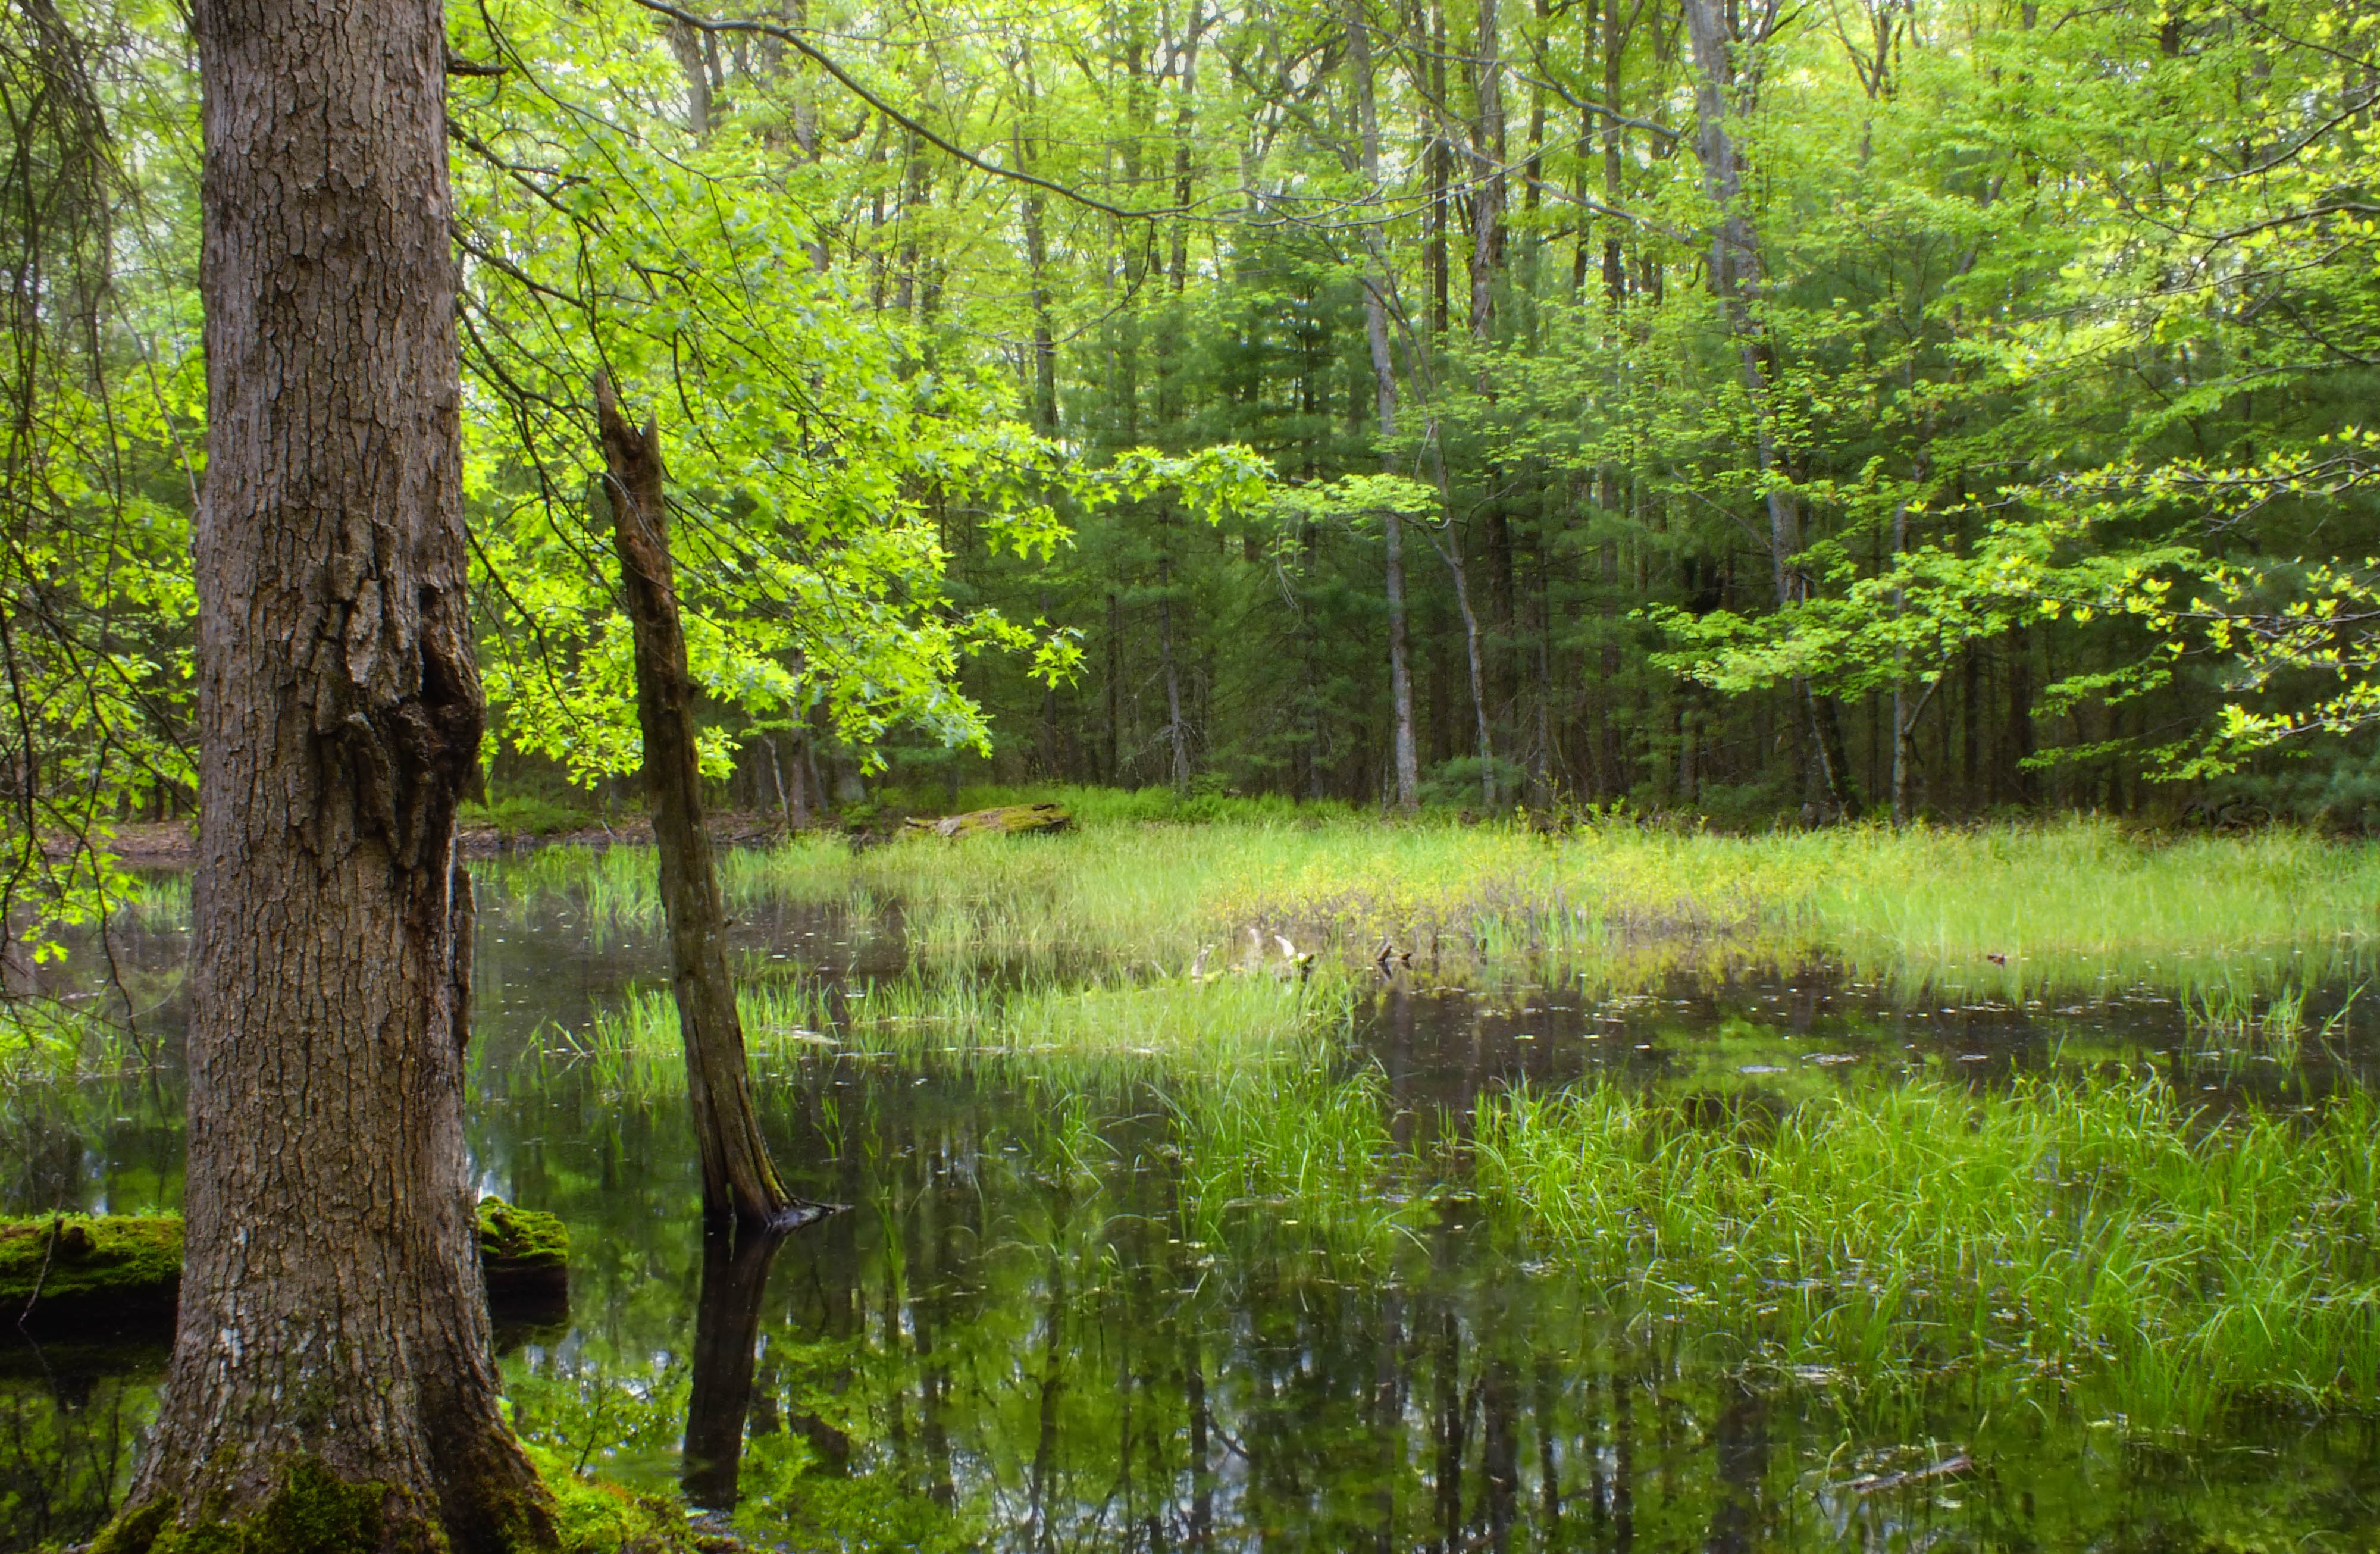 Lush forest surrounds a wide wetland pond.